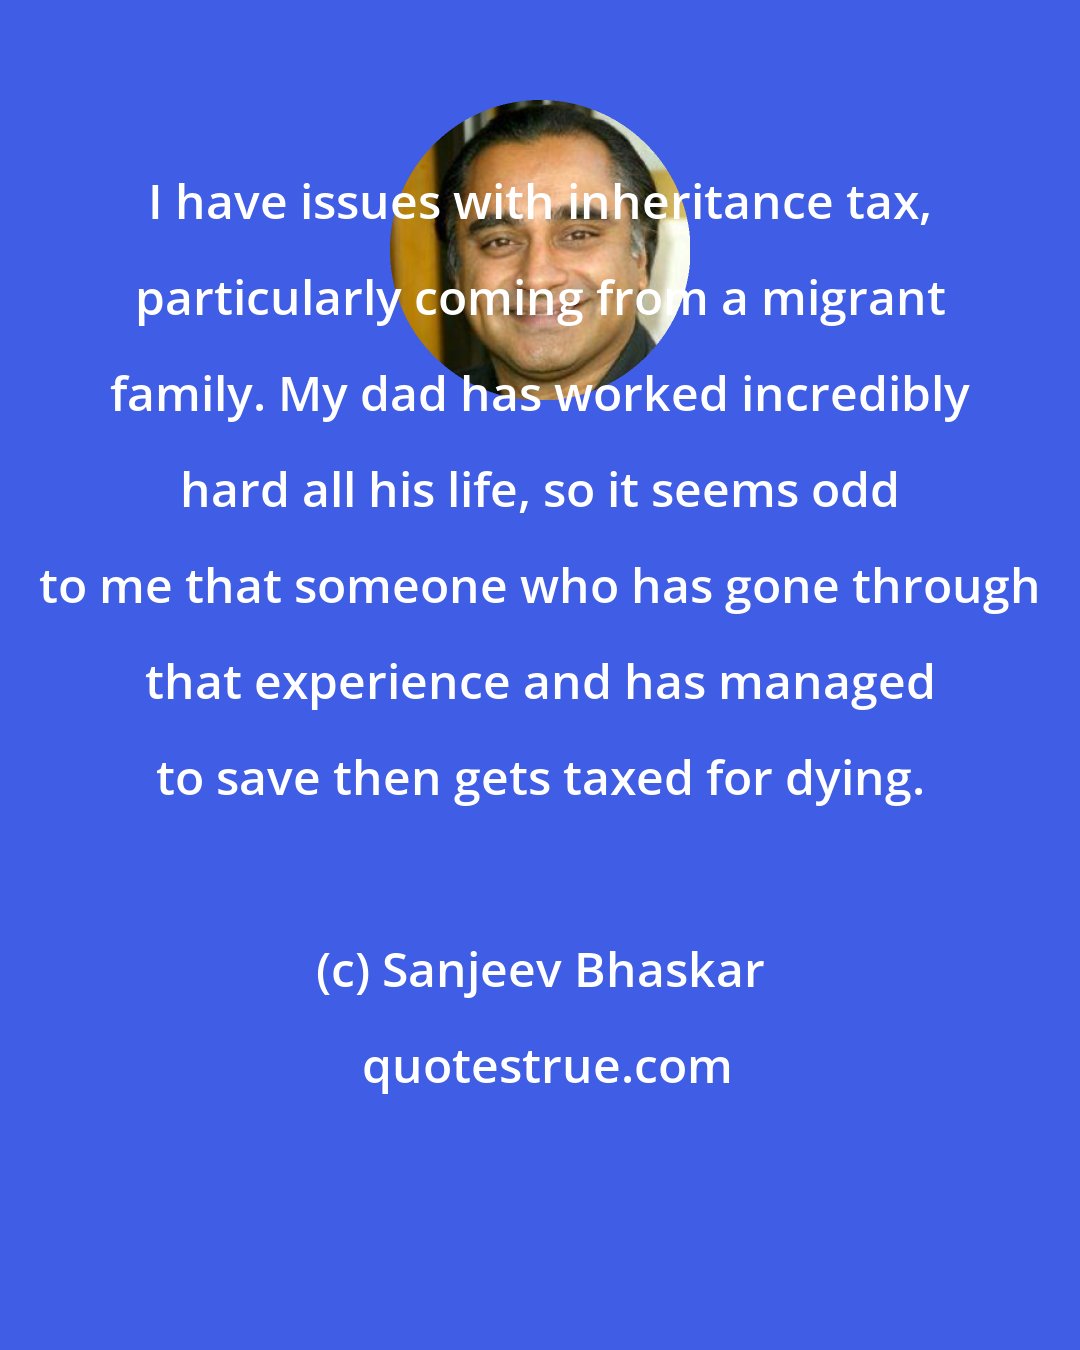 Sanjeev Bhaskar: I have issues with inheritance tax, particularly coming from a migrant family. My dad has worked incredibly hard all his life, so it seems odd to me that someone who has gone through that experience and has managed to save then gets taxed for dying.